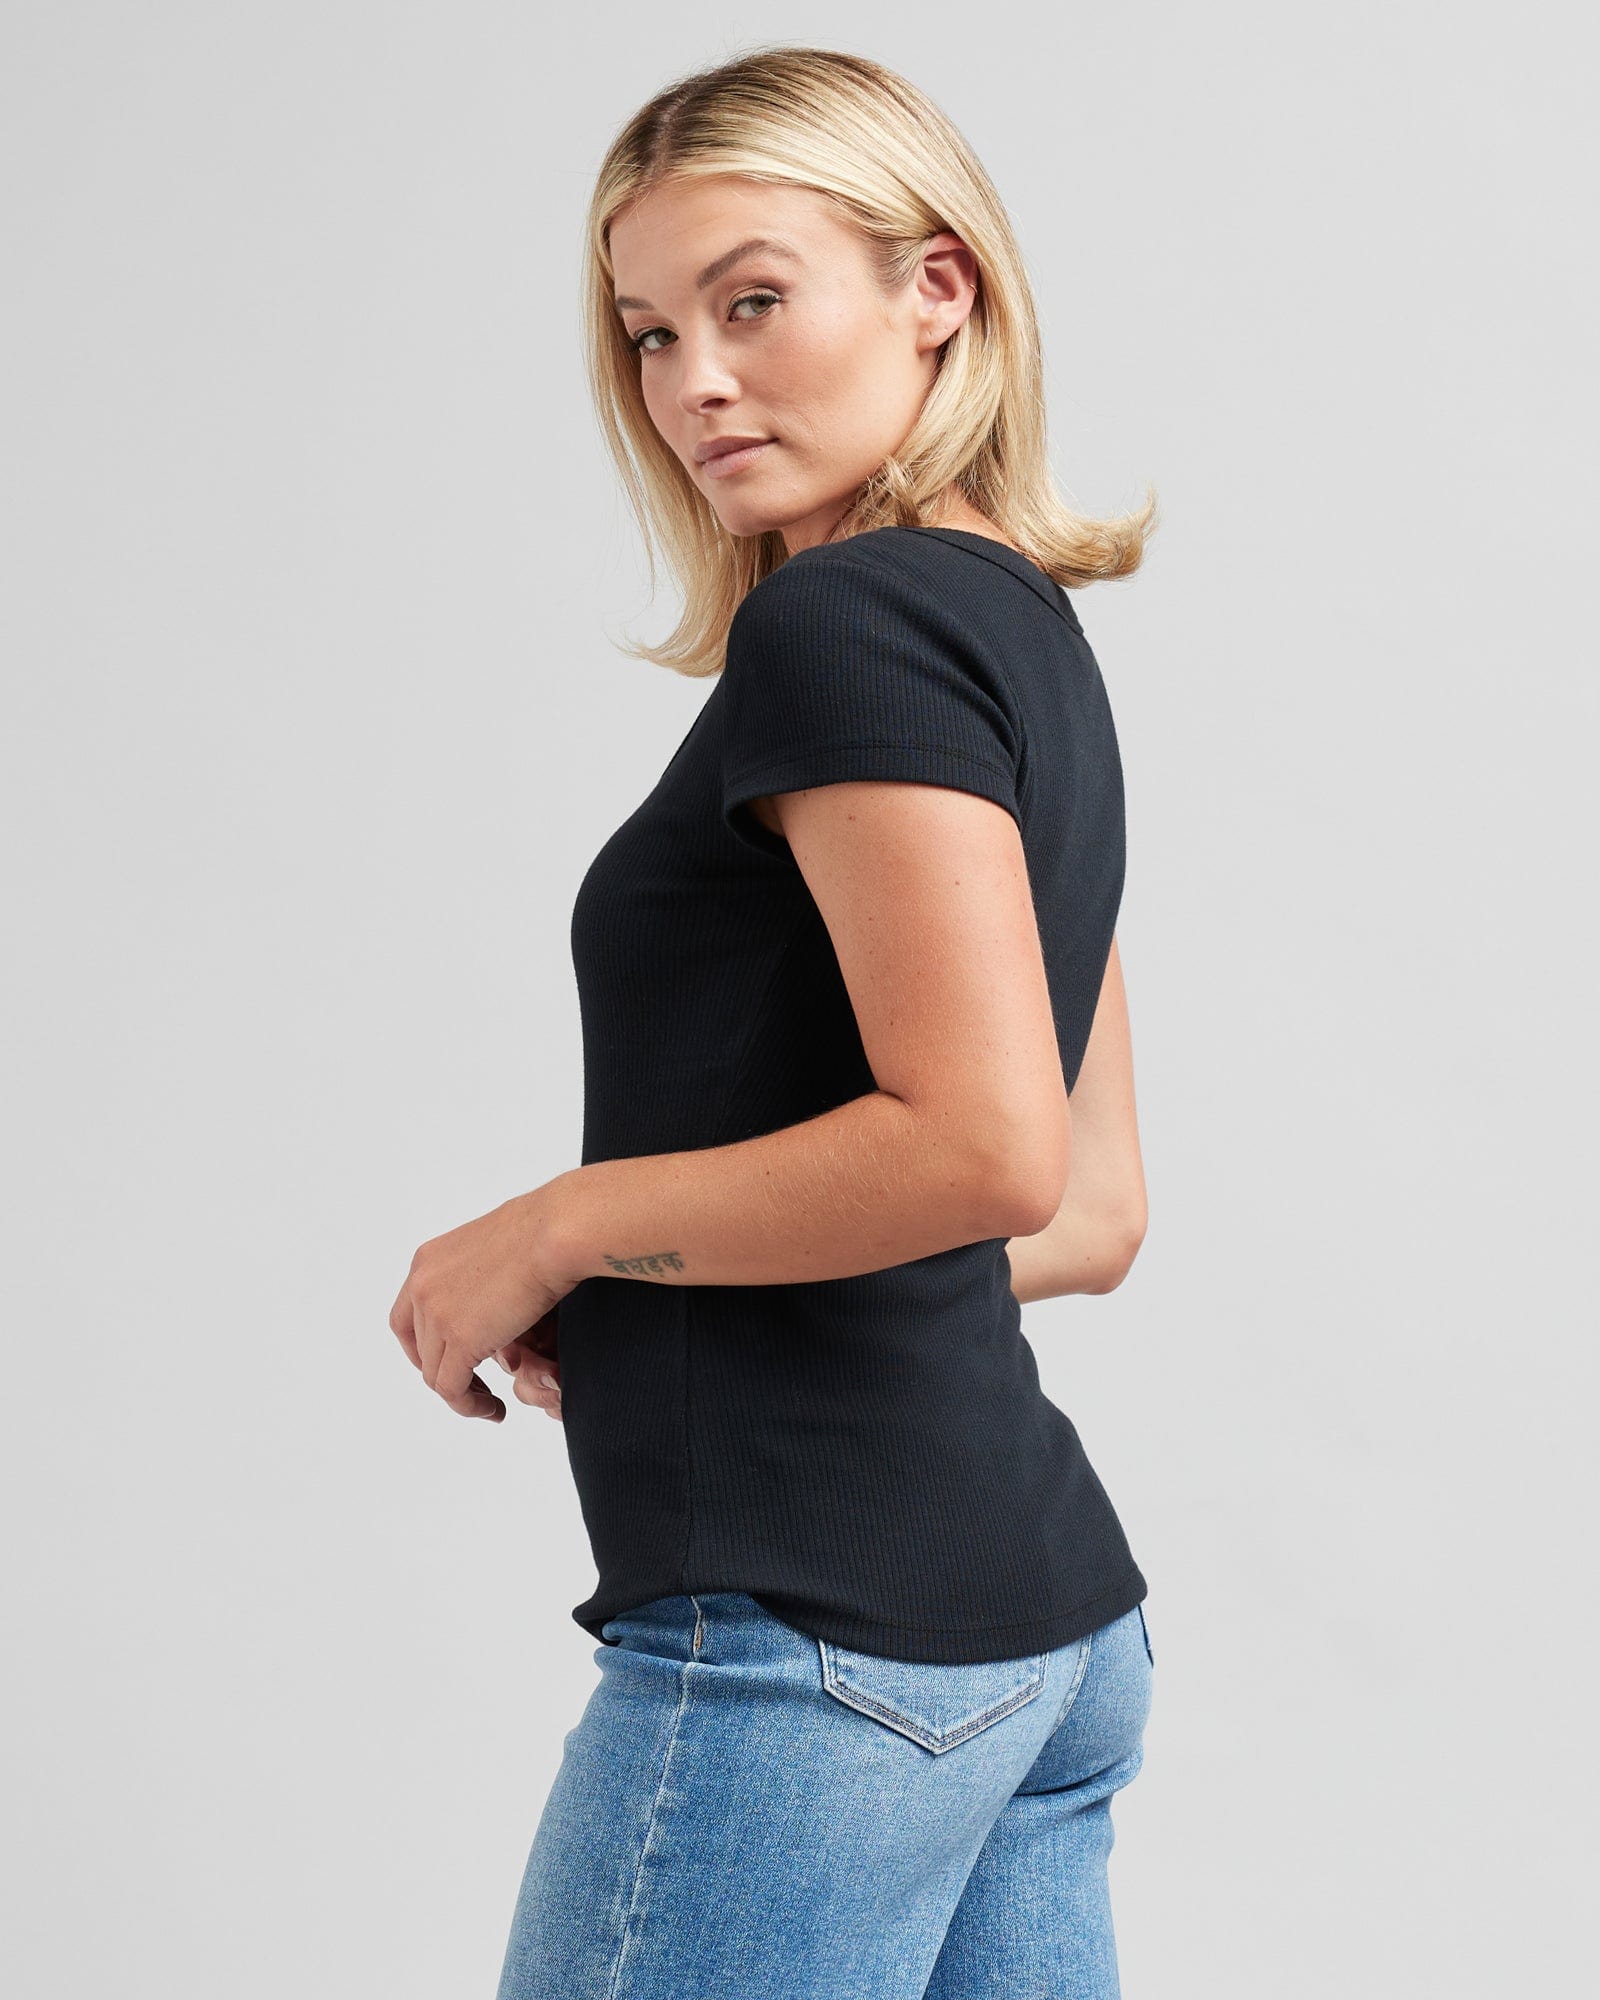 Woman in a short sleeve, black, fitted tee